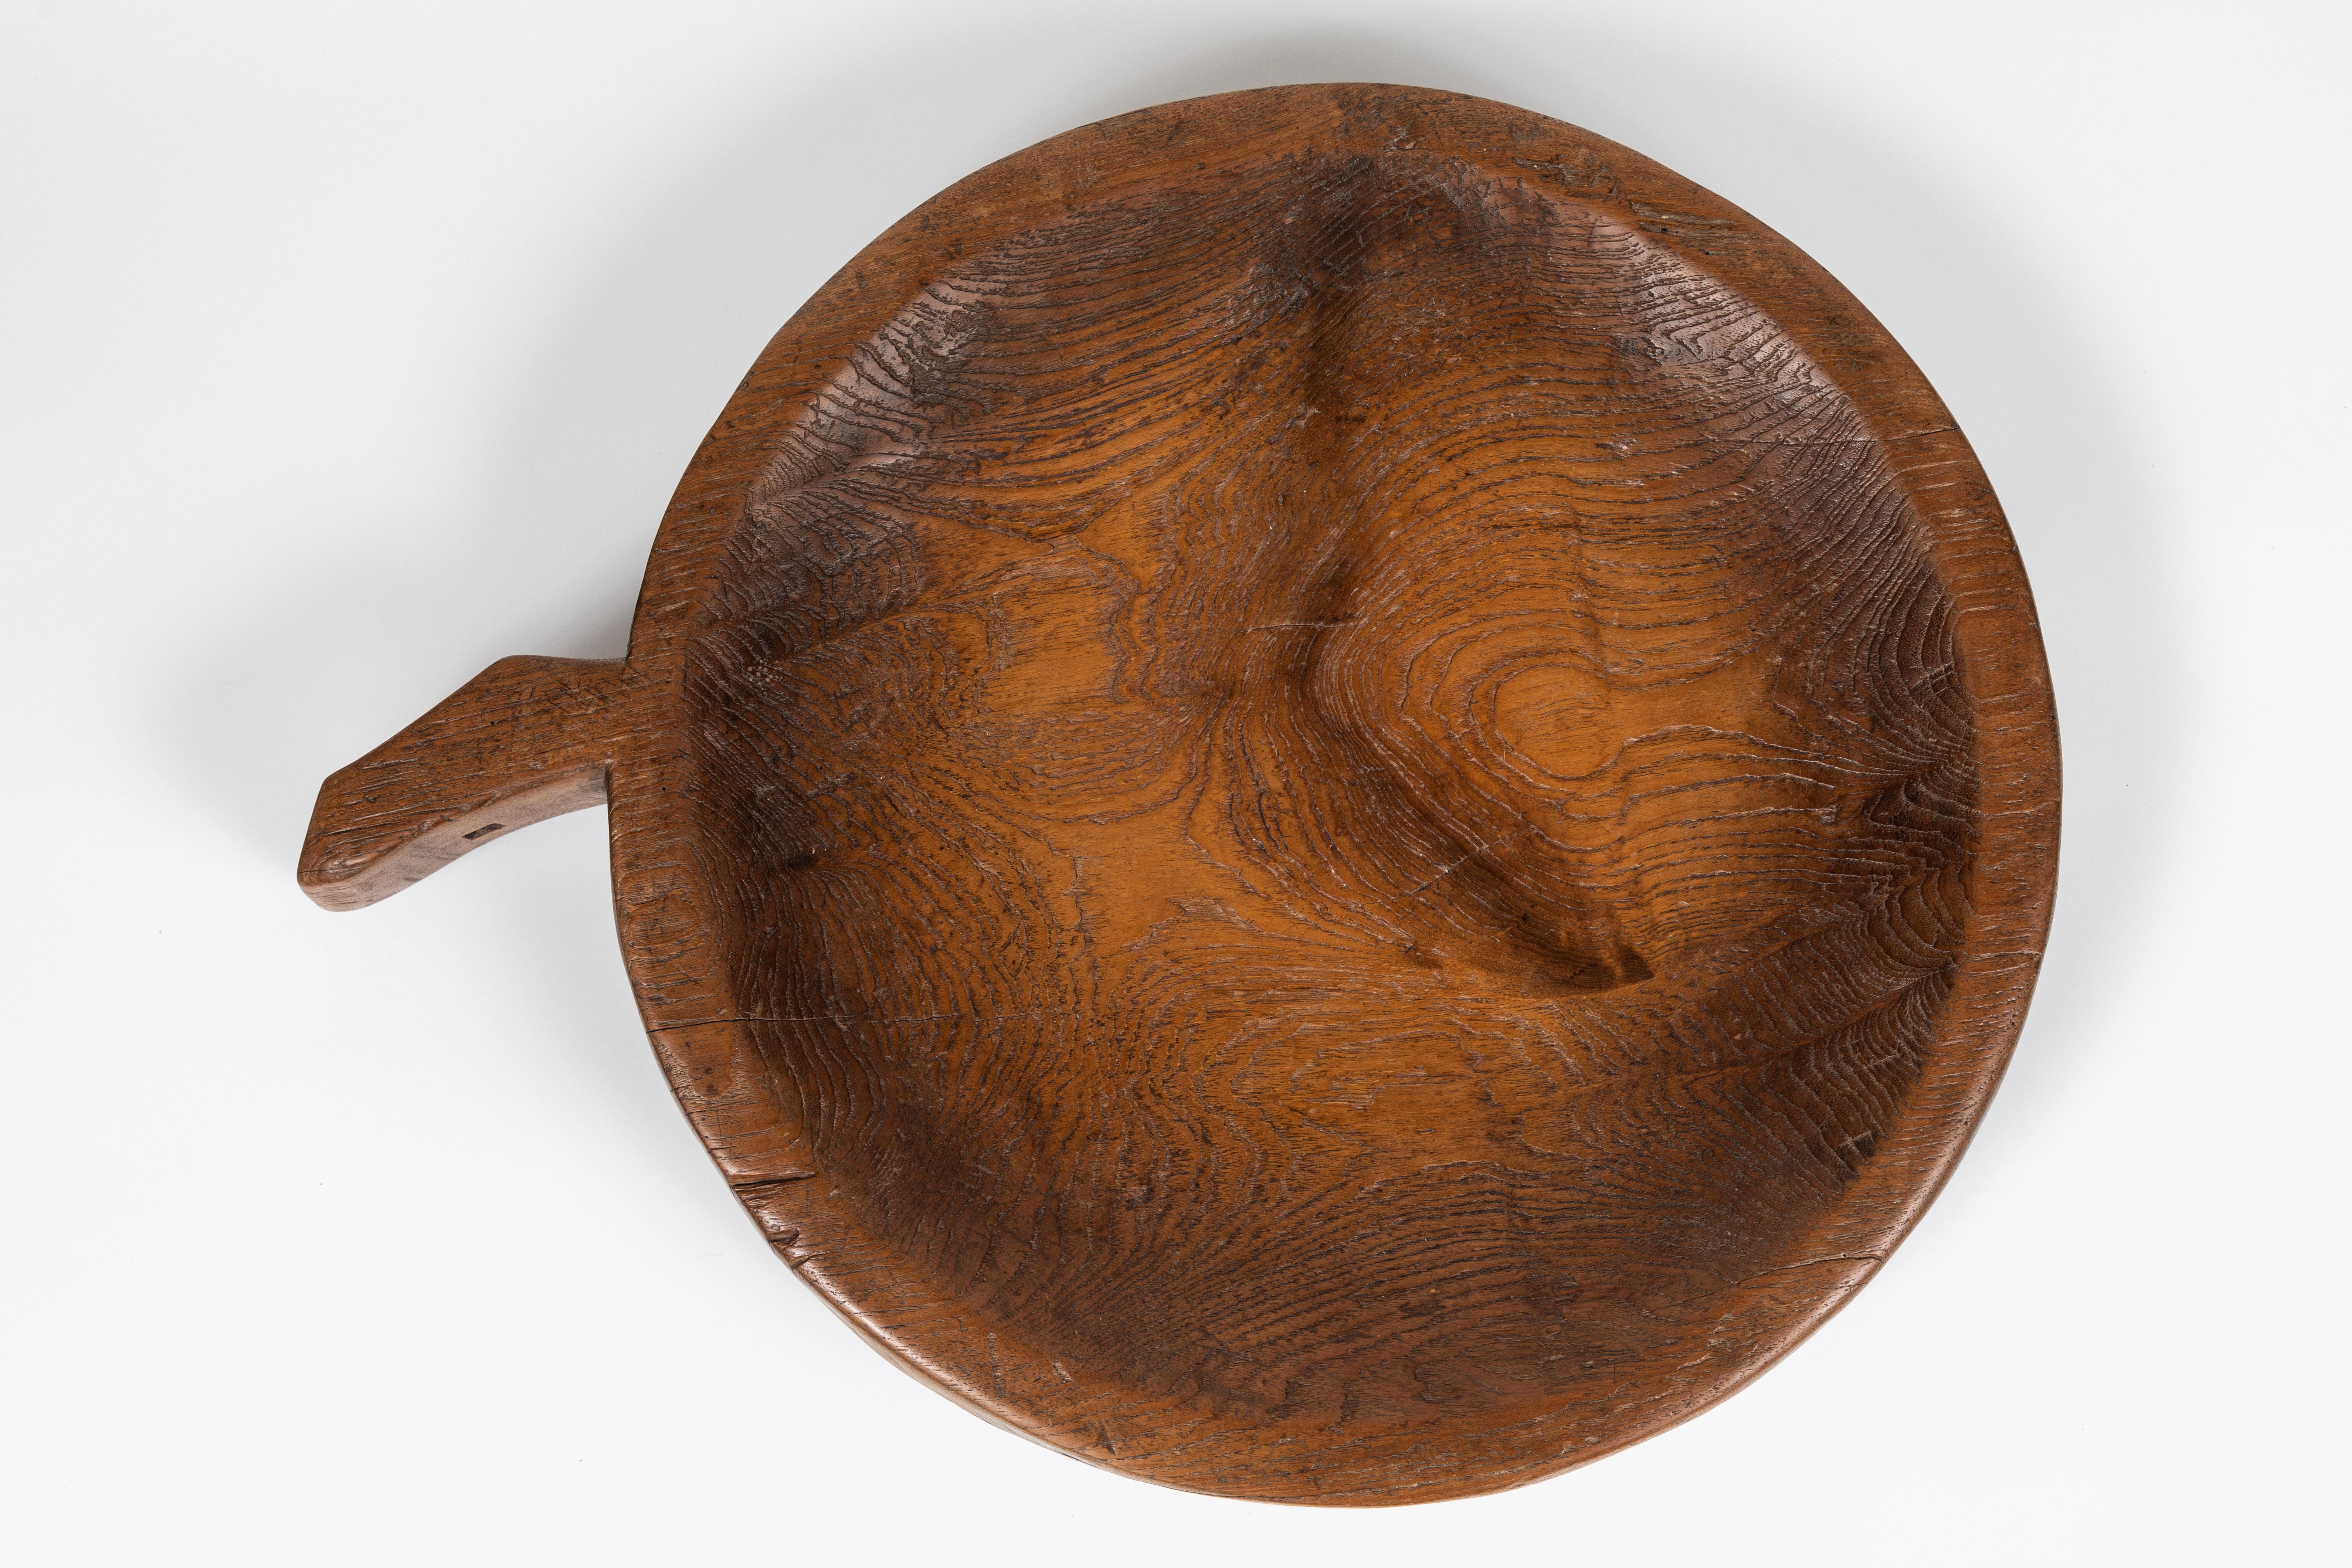 Old Teak Sticky rice tray / bowl from Thailand, possibly a table mortar, carved from one piece of wood.
     